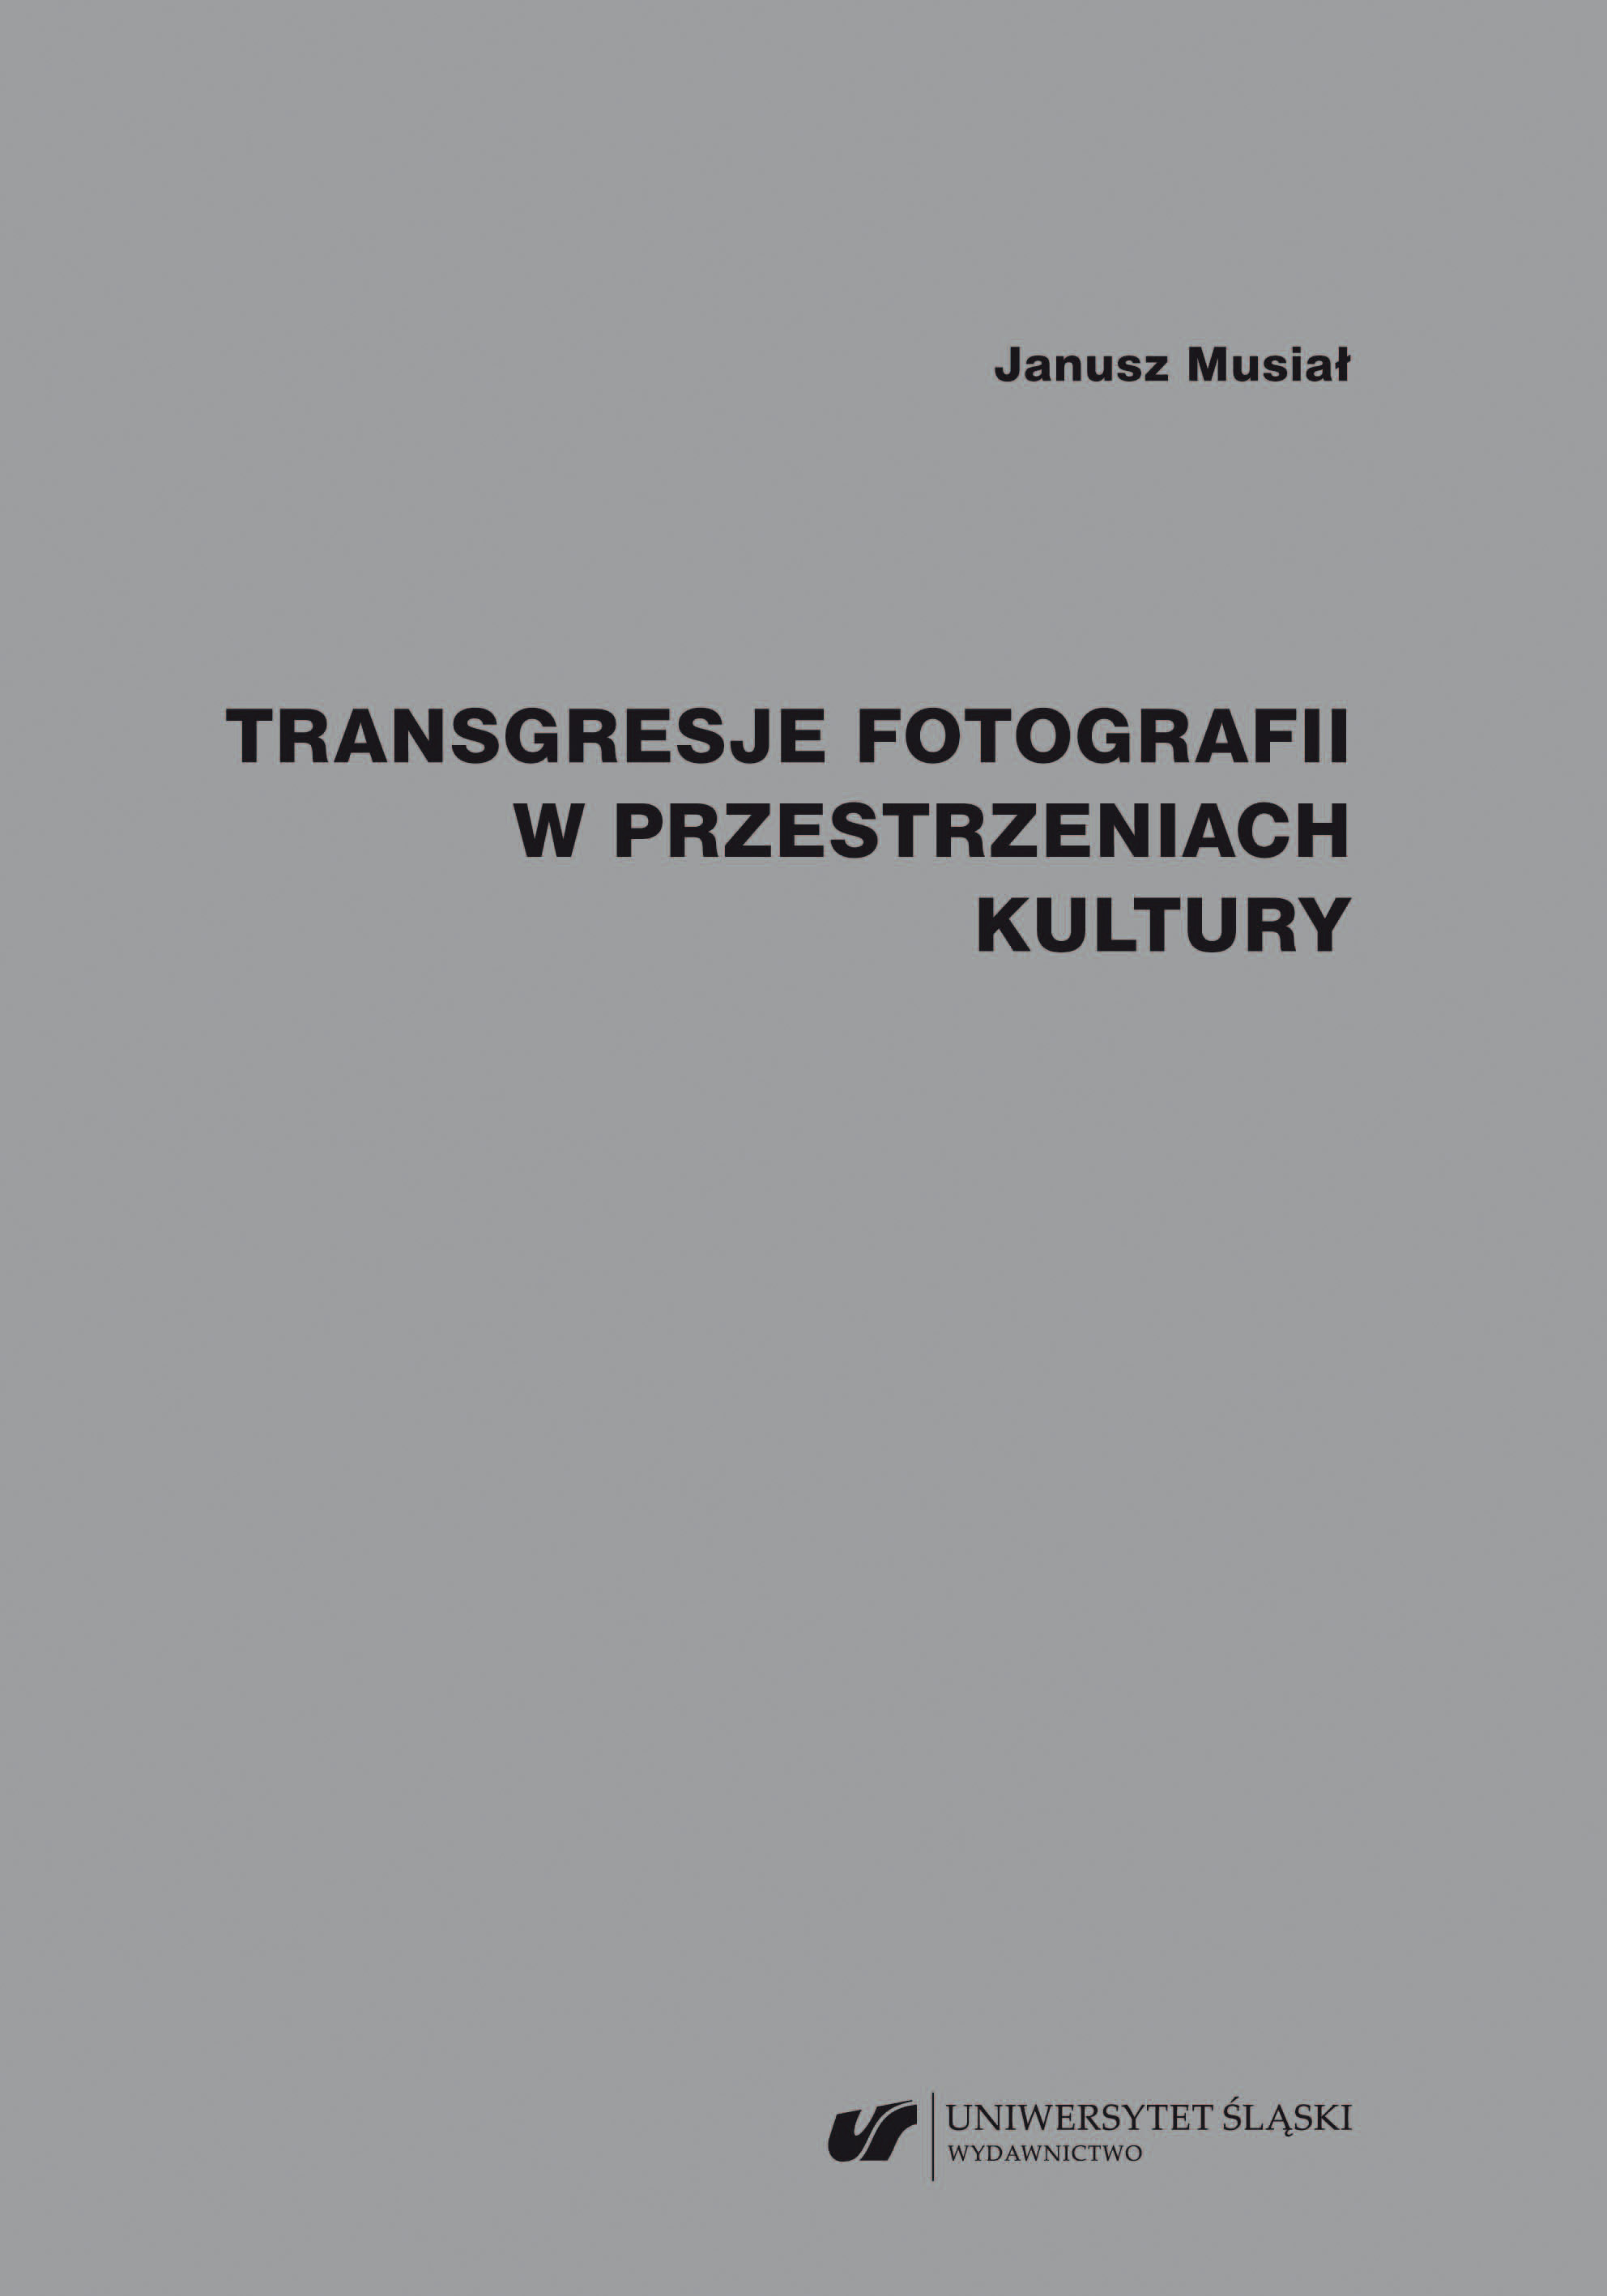 Transgressions of photography in spaces of culture